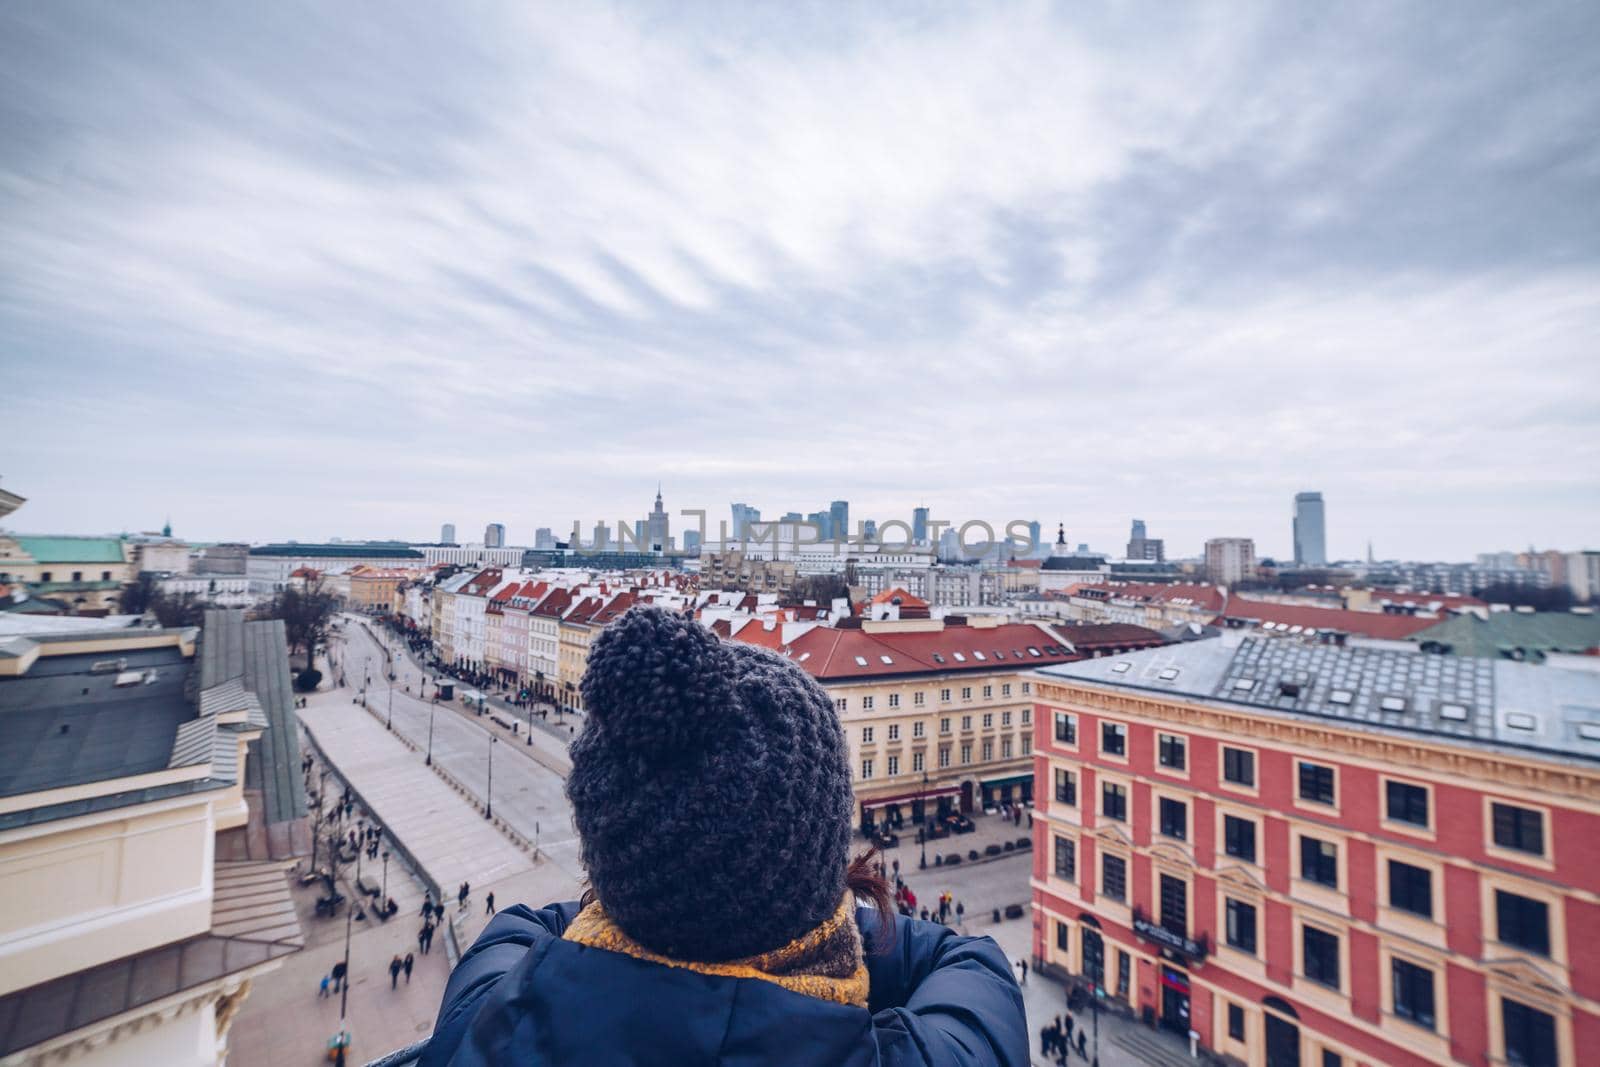 Tourist looking the Warsaw City Center from the tower during winter season by Sandronize